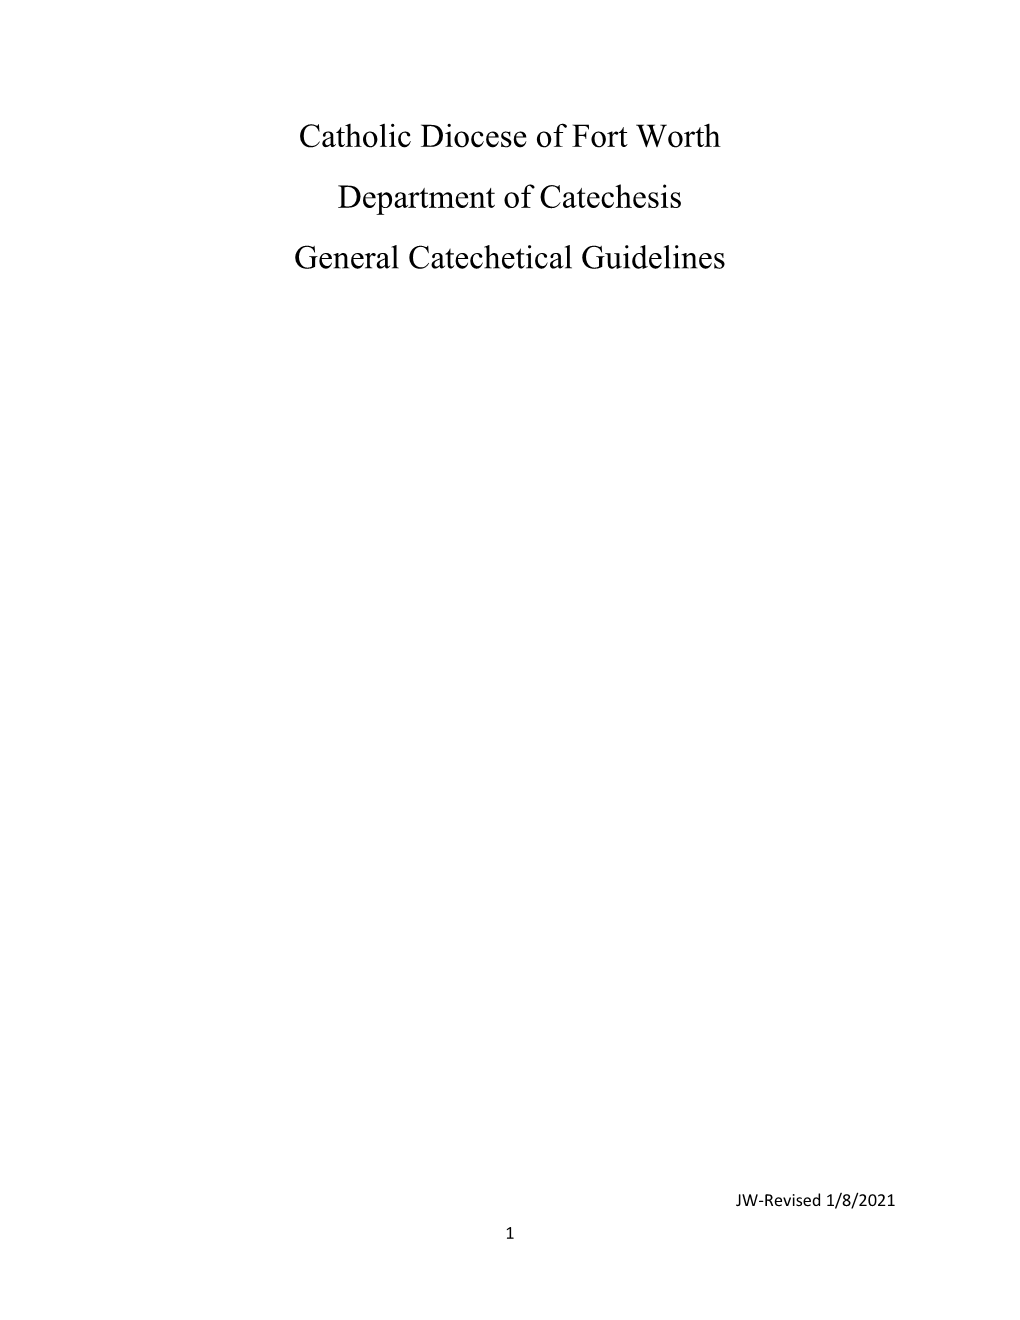 General Catechetical Guidelines